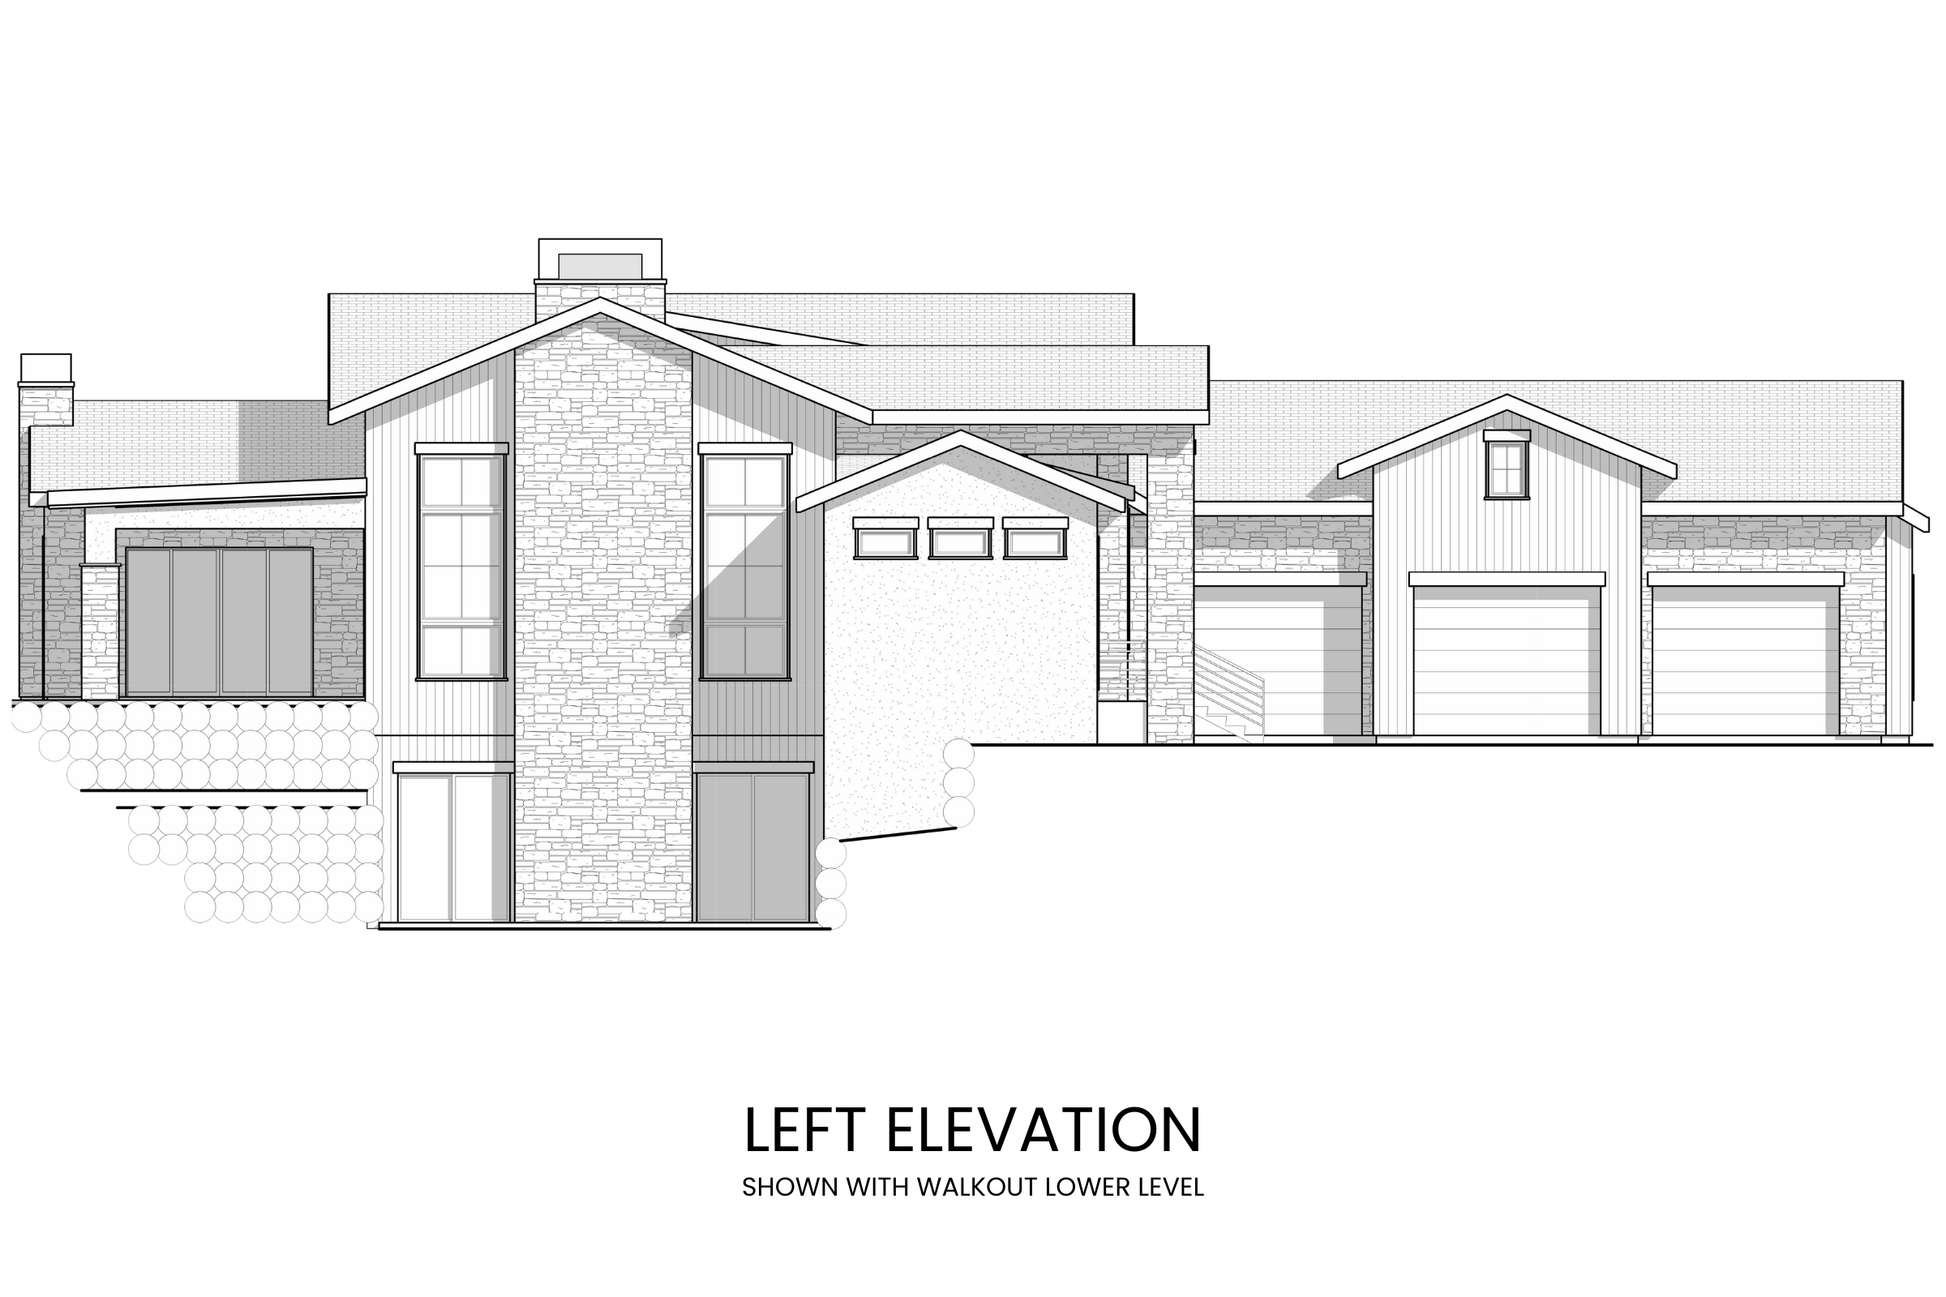 Luxurious-House-Plan-with-Gourmet-Kitchen-and-Working-Pantry-Left-Elevation-Rocky-Mountain-Plan-Company-Stanley-Peak